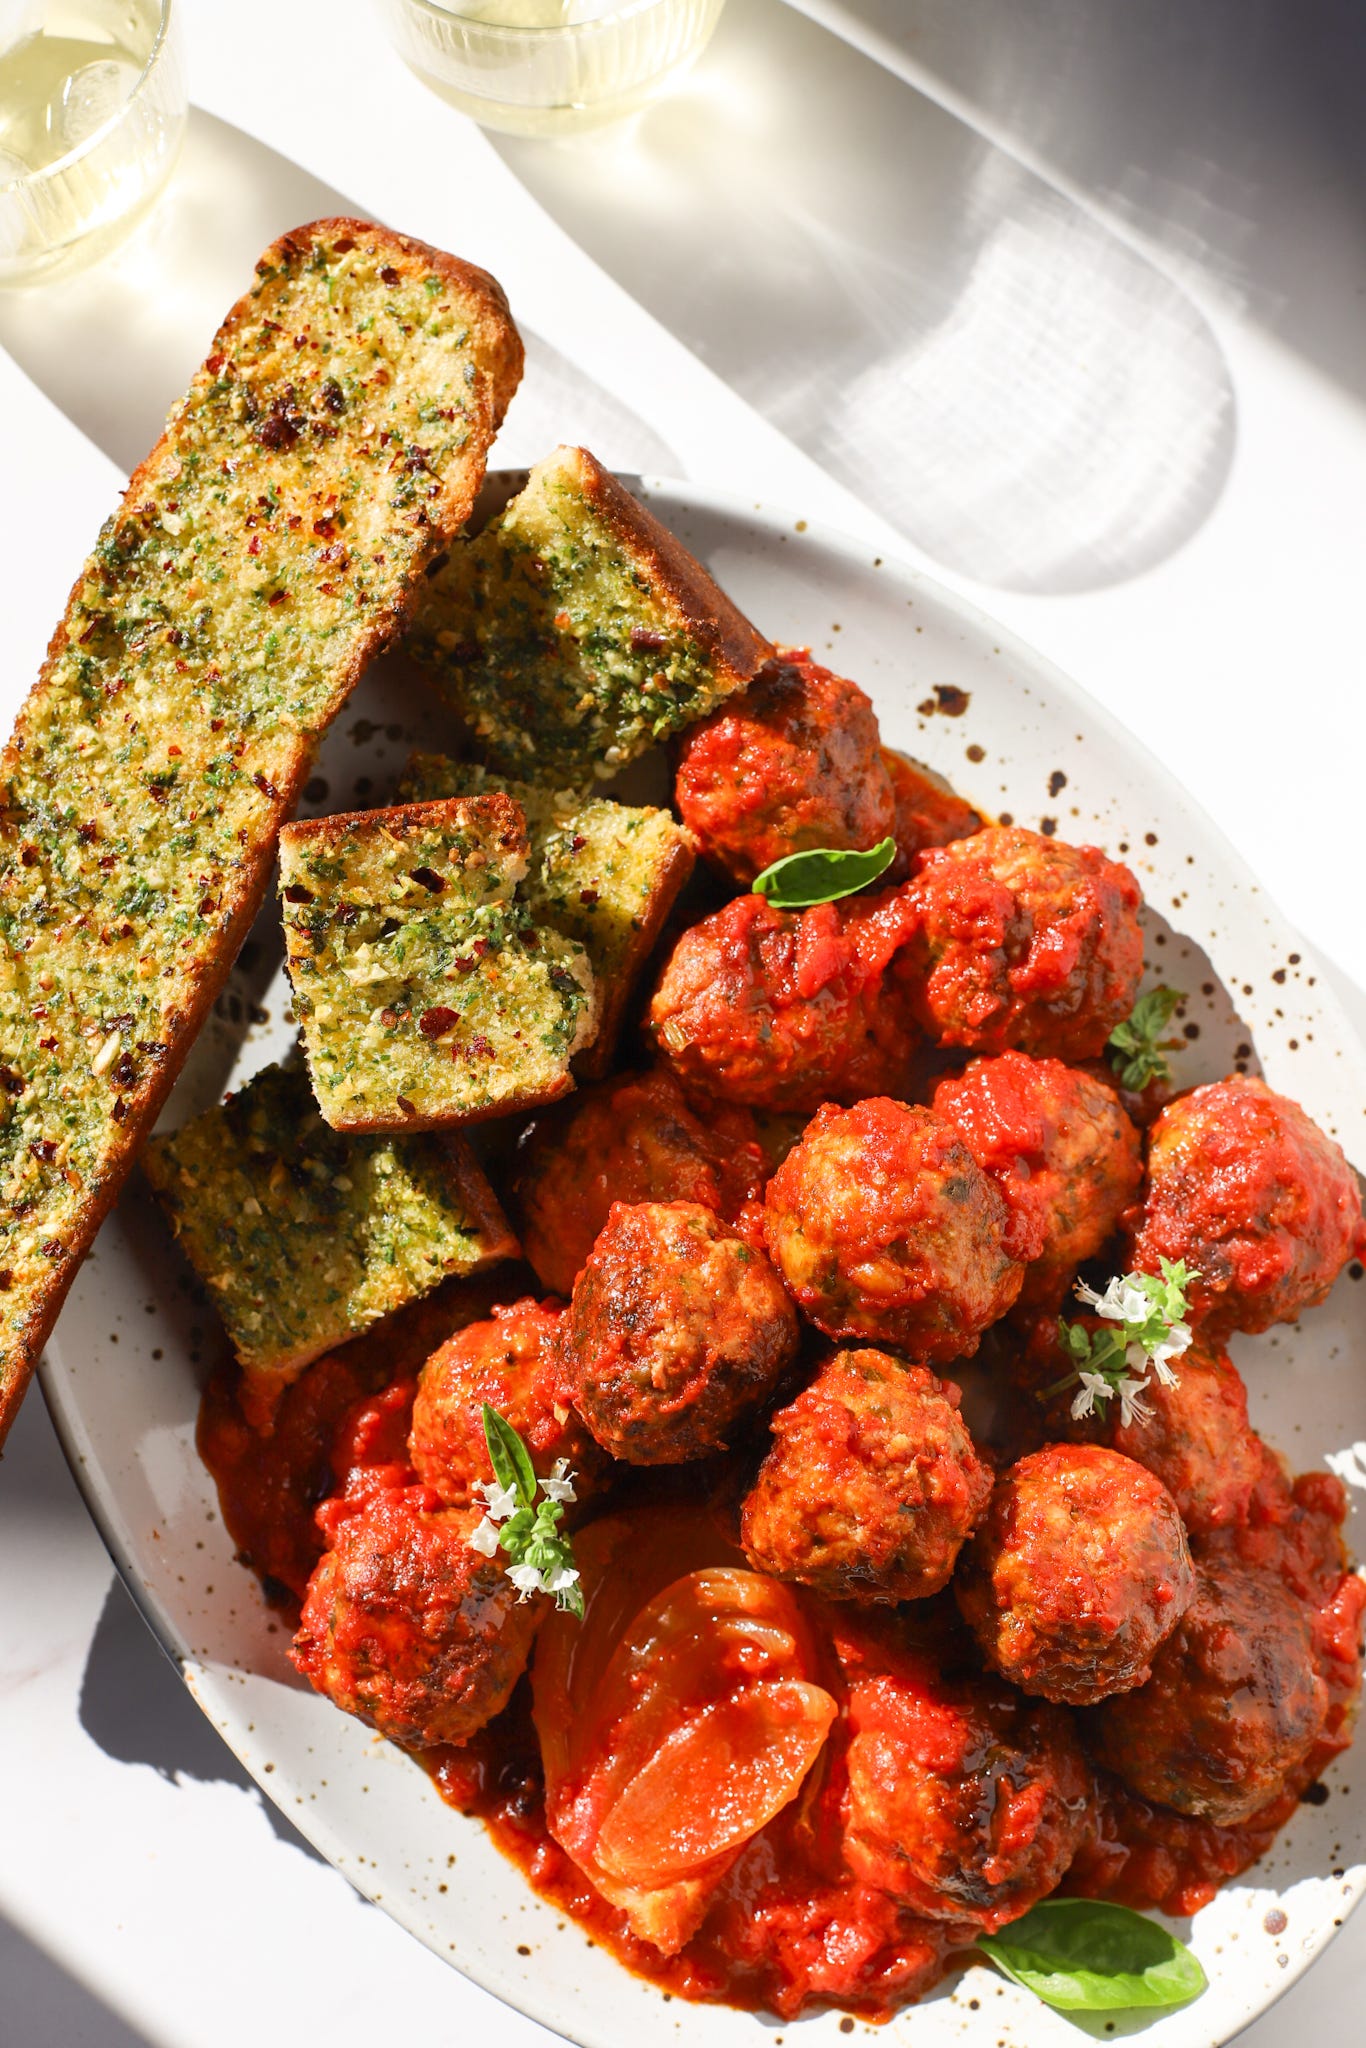 Platter of meatballs in tomato sauce with garlic bread on the side